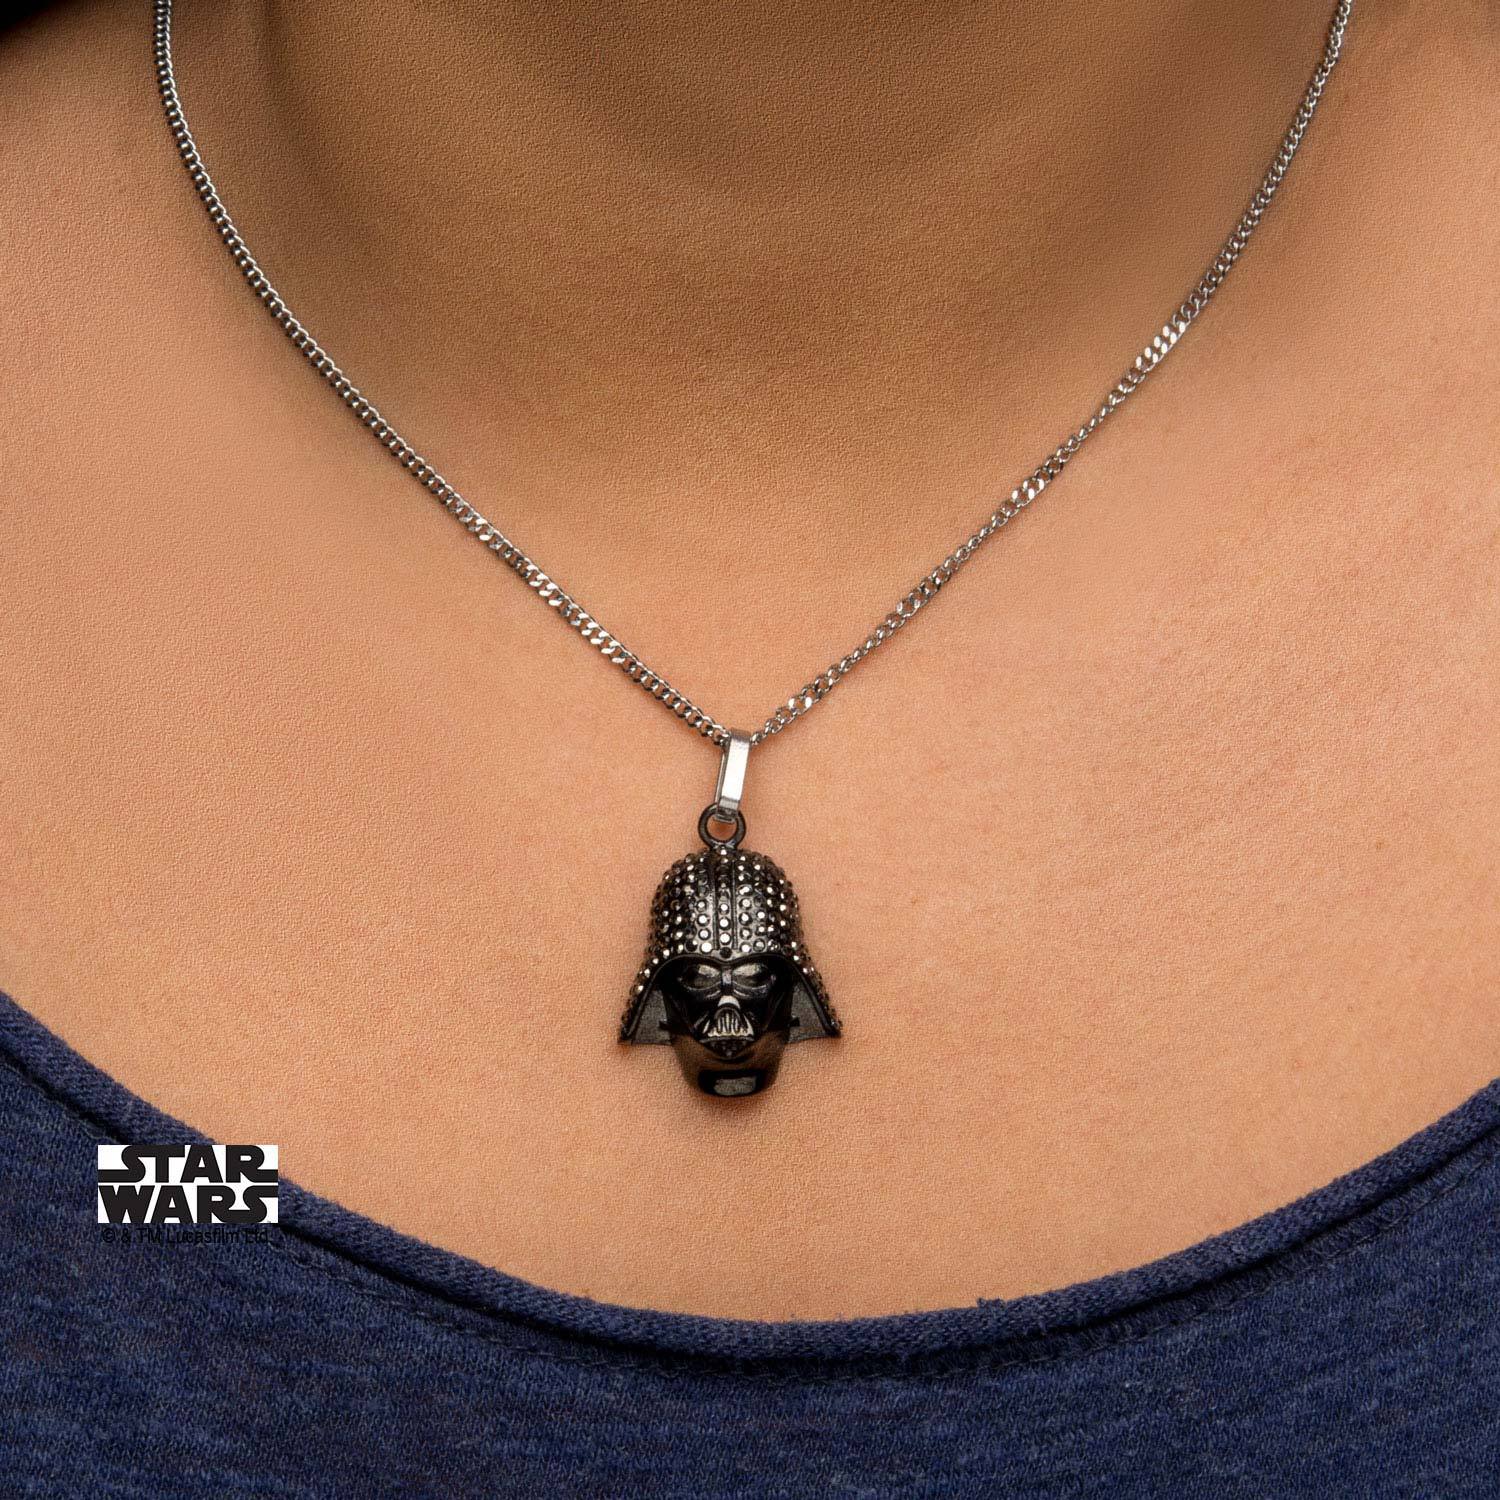 Star Wars Darth Vader with Clear Gem Pendant Necklace